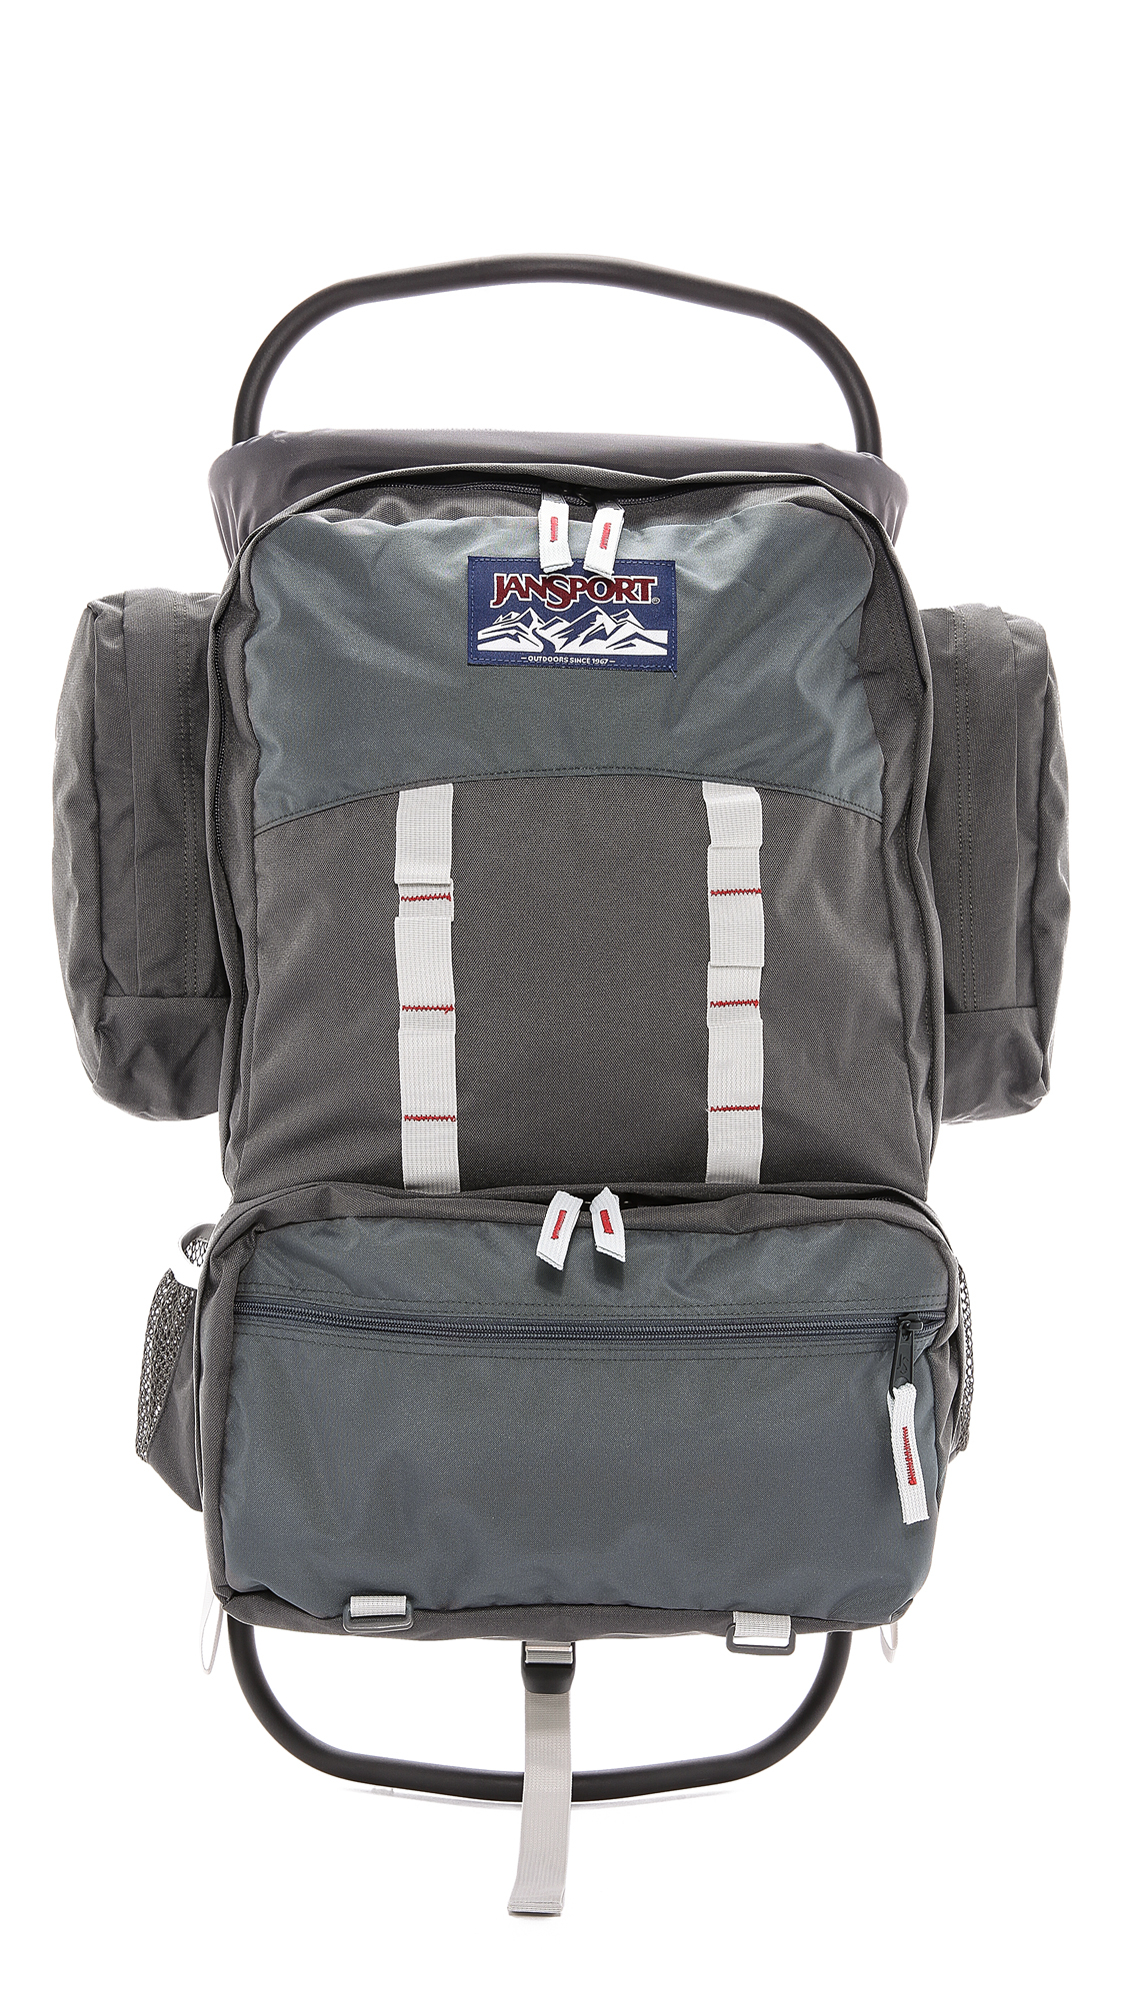 Lyst - Jansport Scout Backpack in Gray for Men